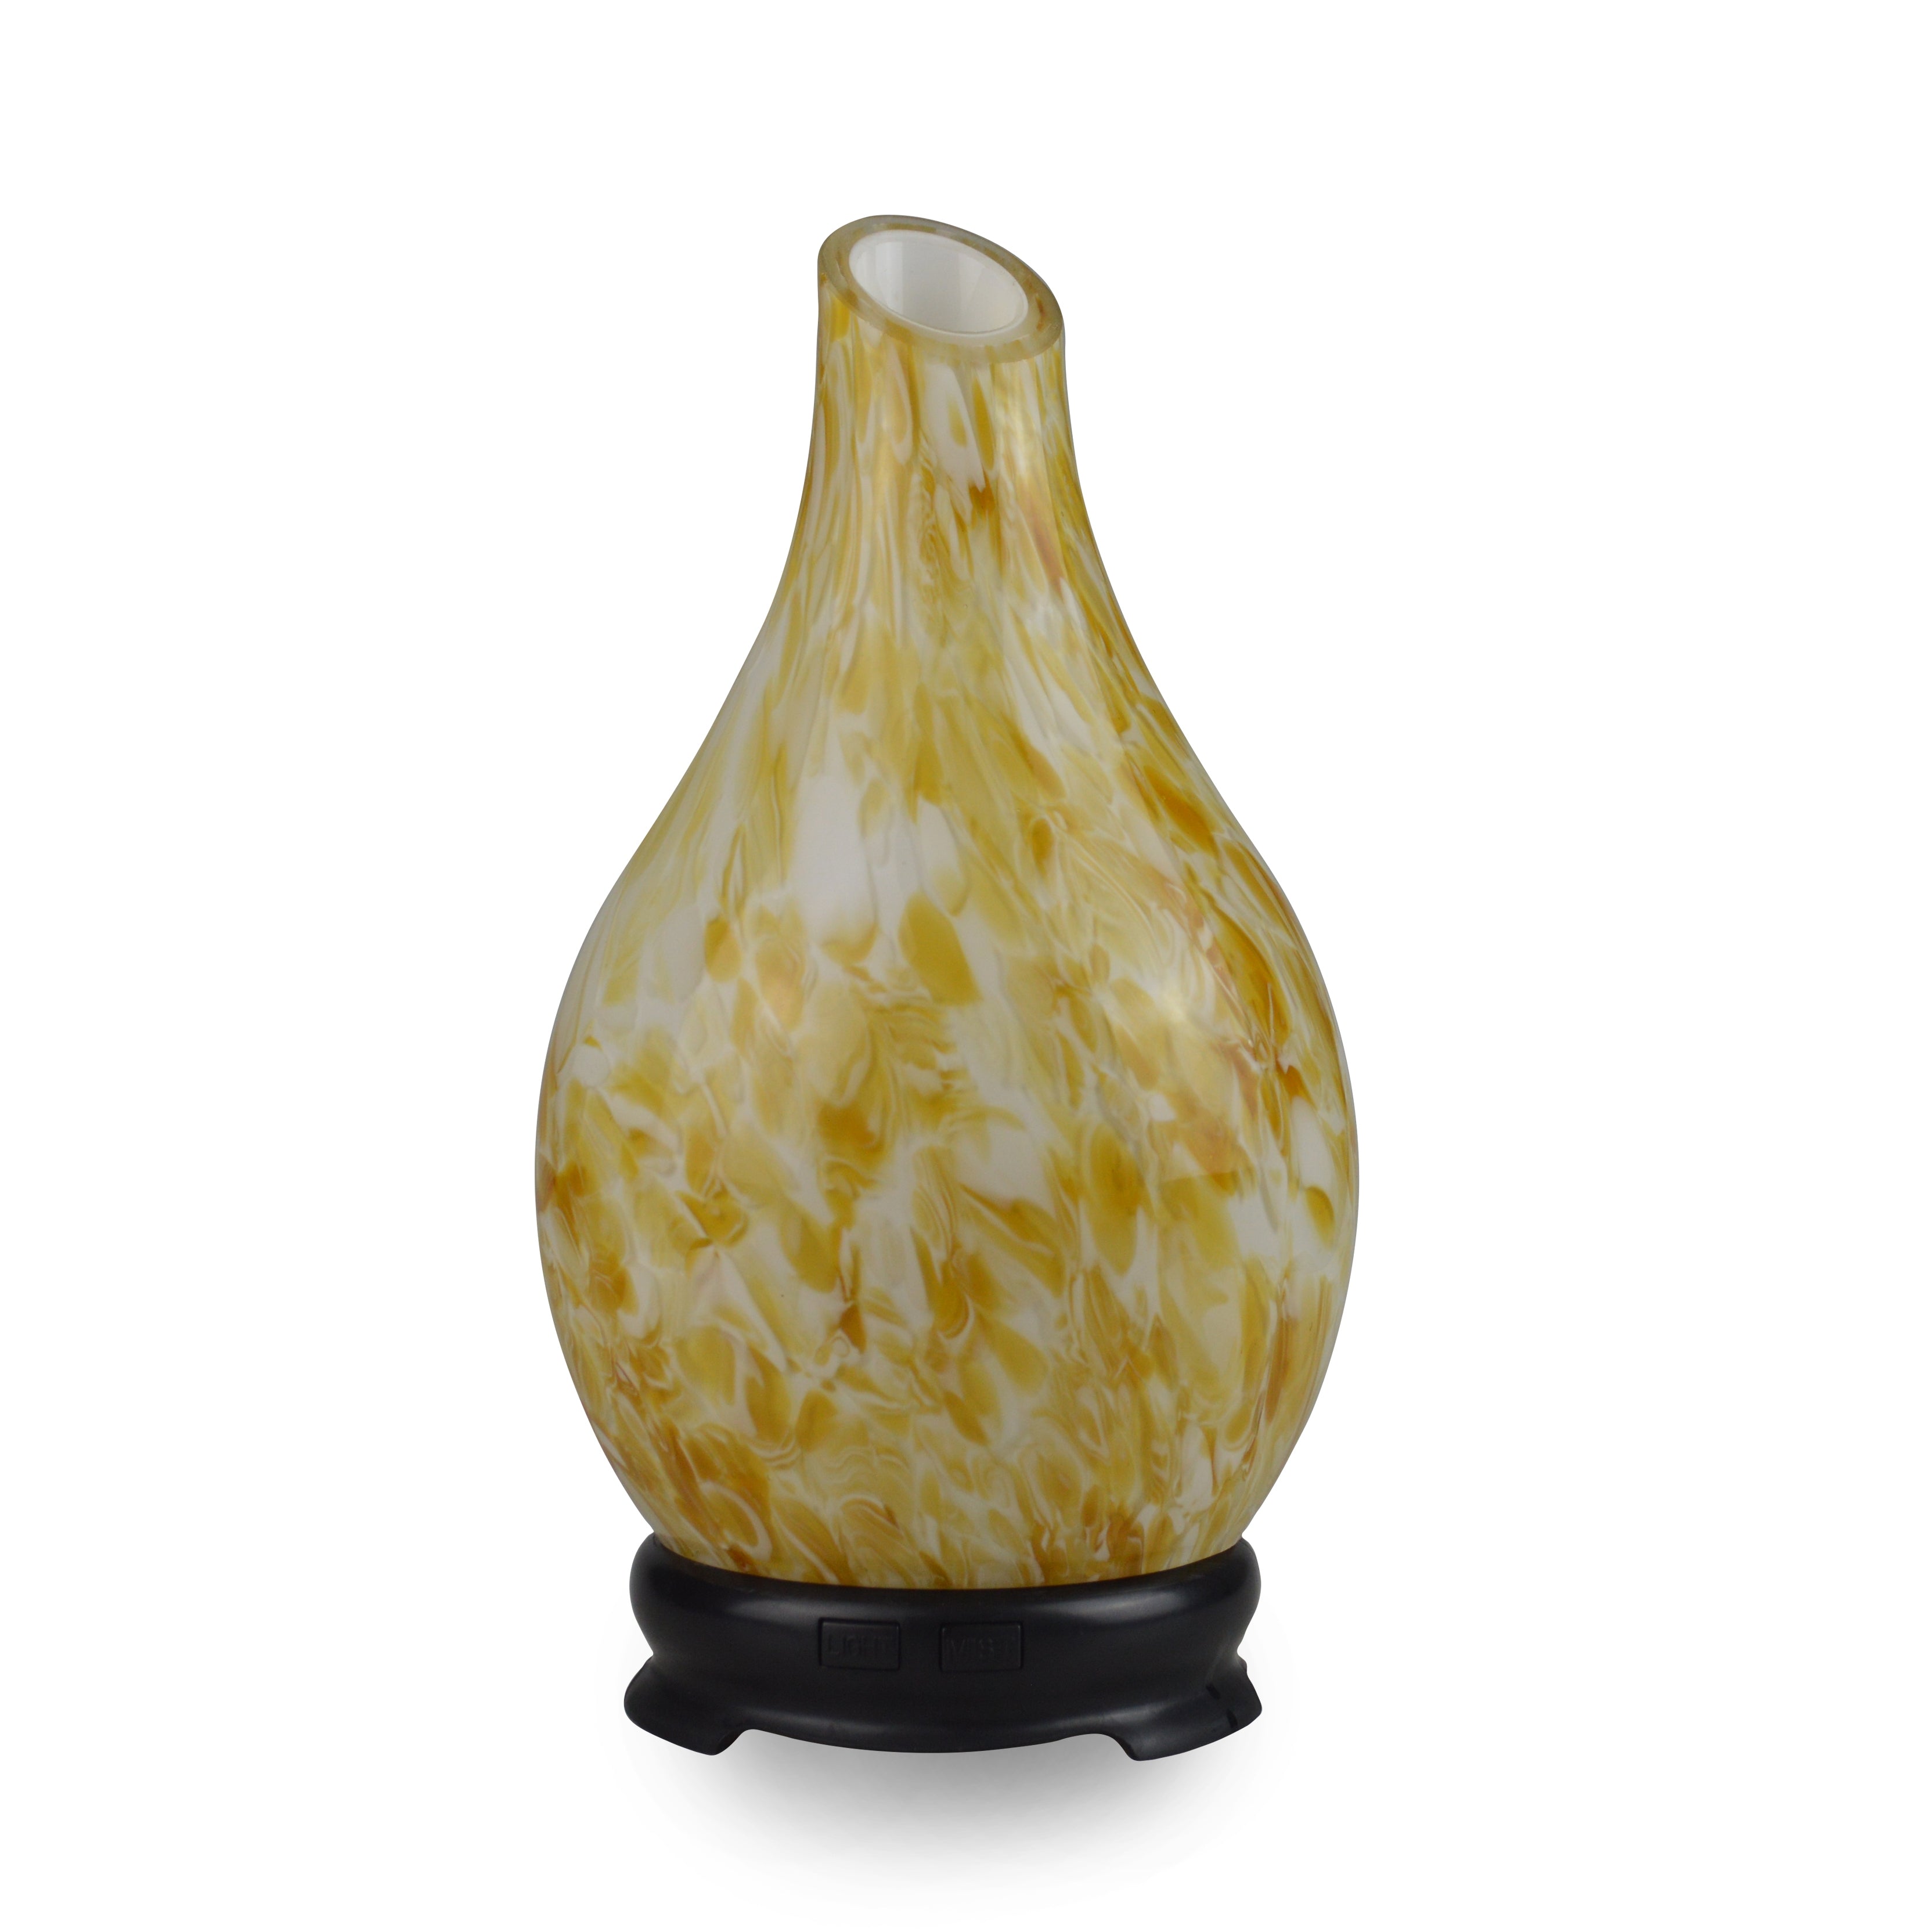 A lovely golden ray shines through when this oil diffuser is turned on, with its fetching design of yellow and white making the perfect summery look, all year-round. 